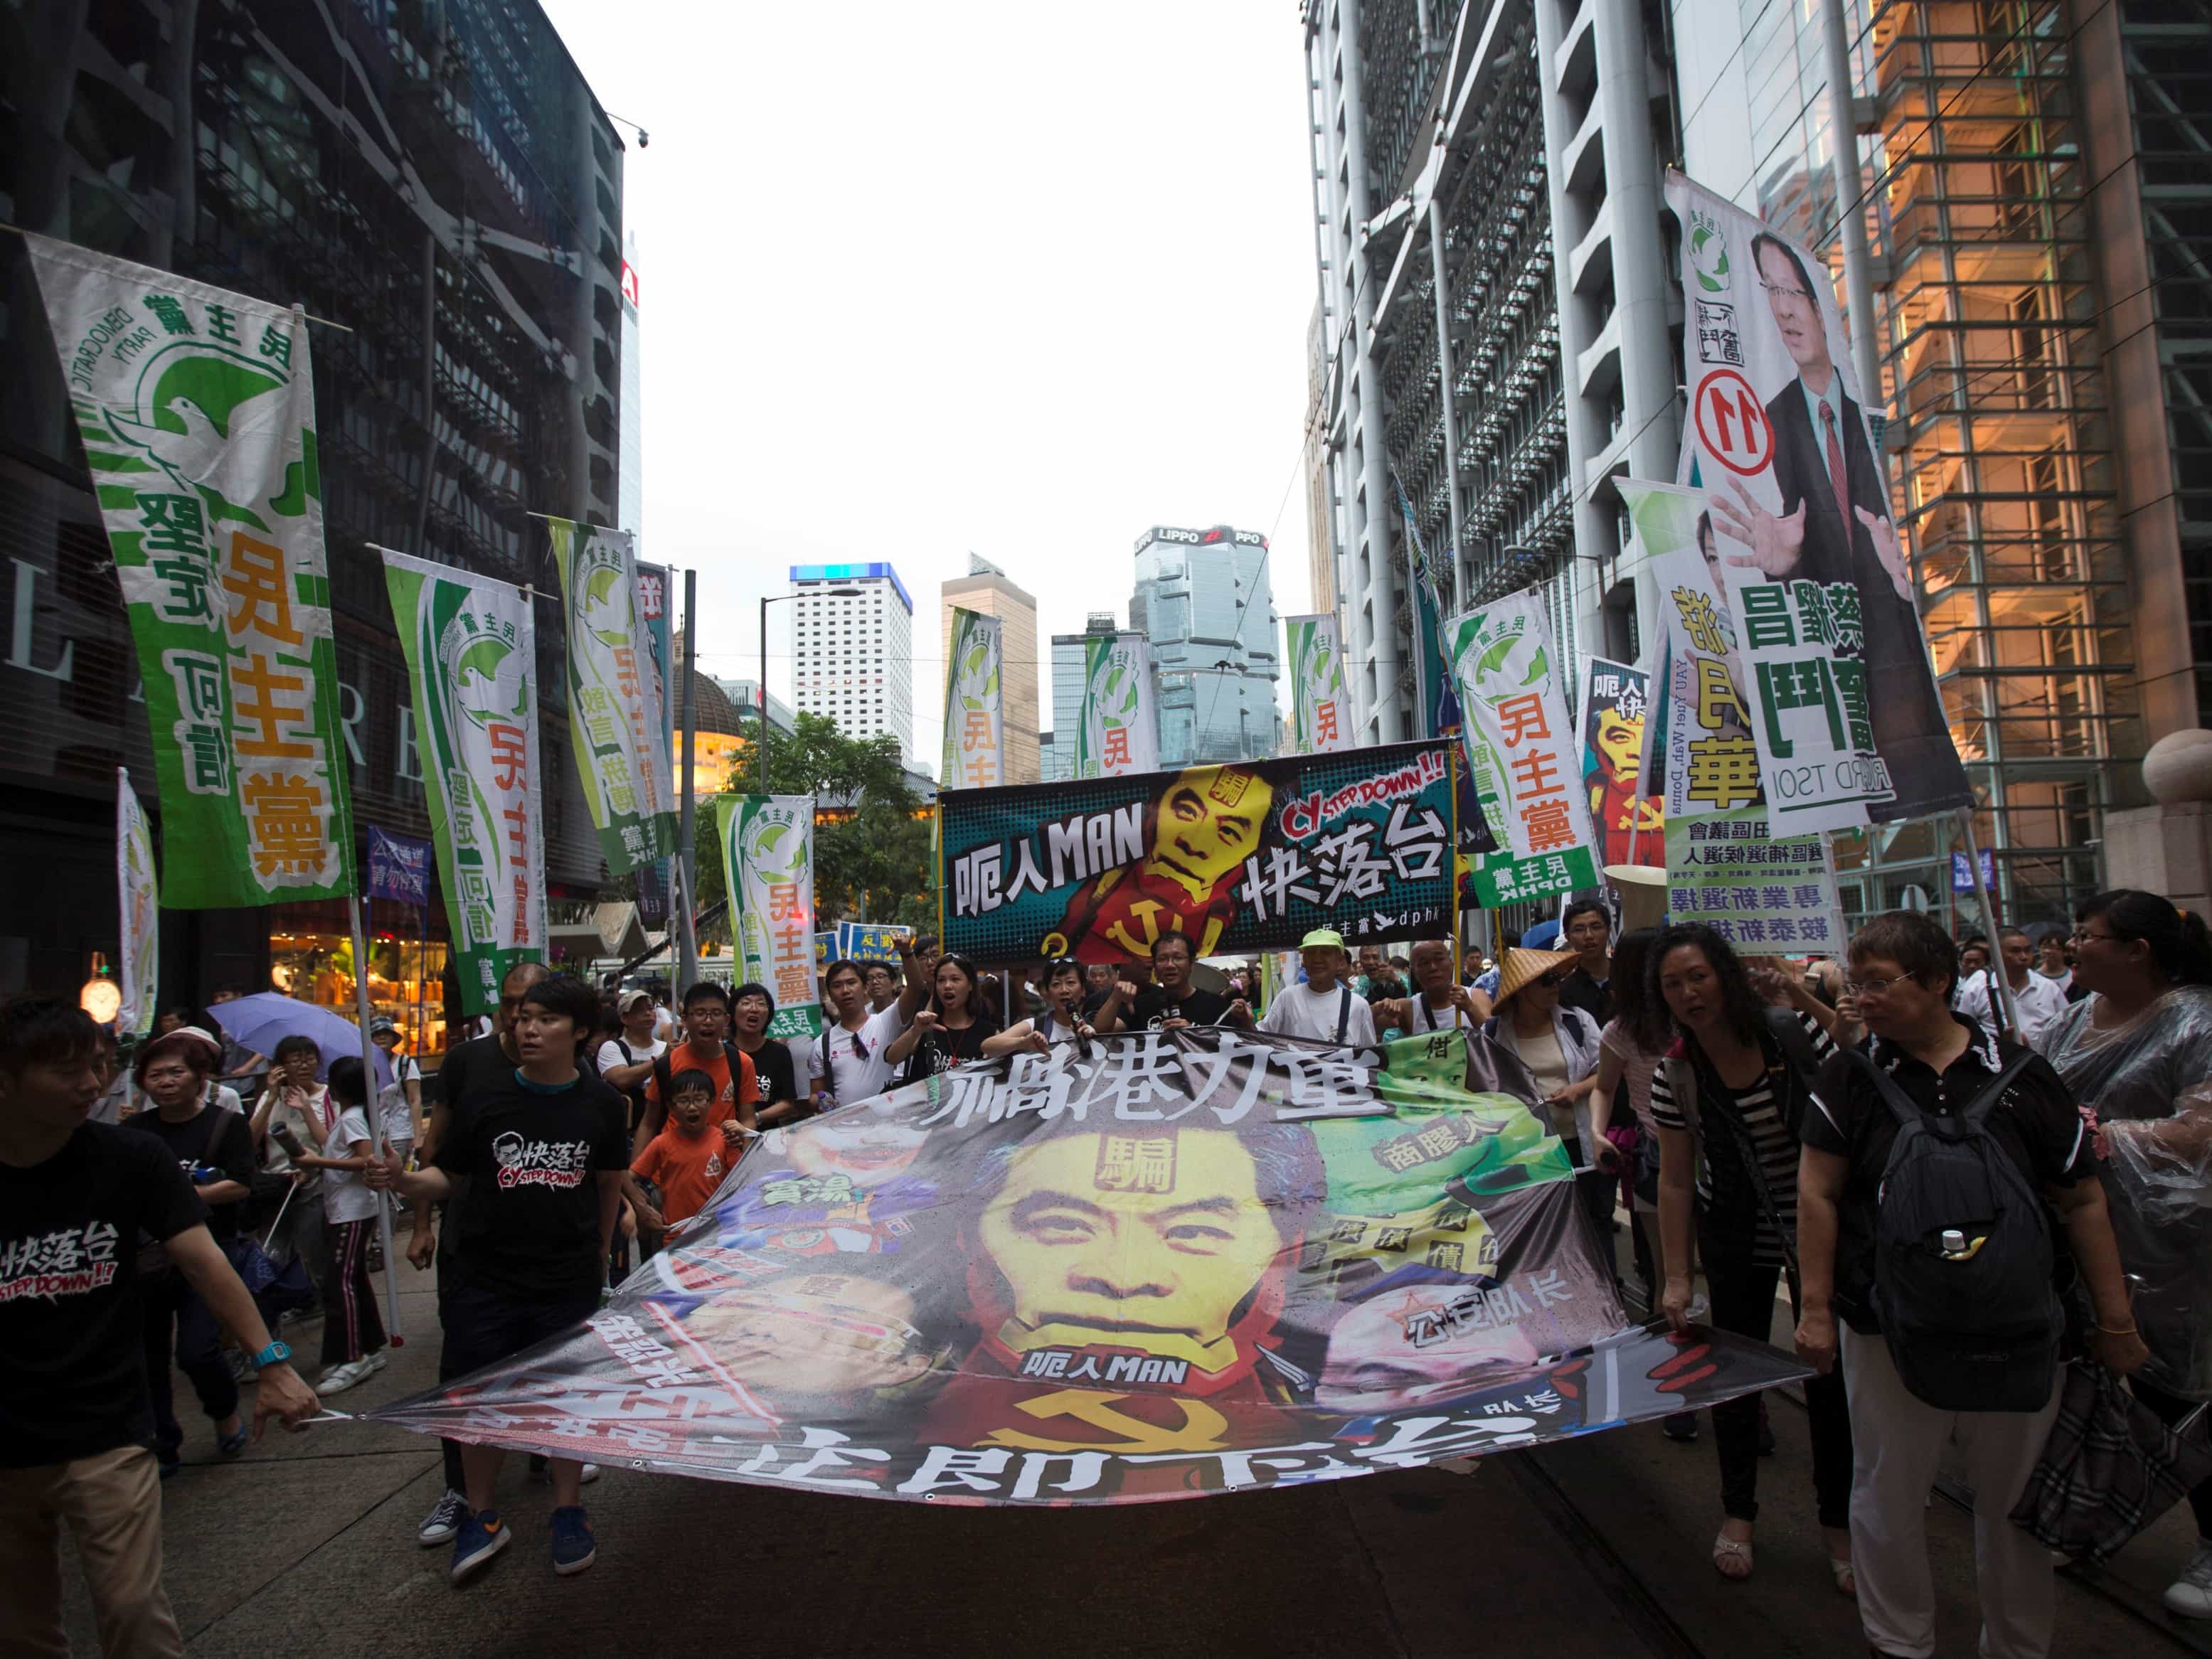 On 1 July 2013 pro-democracy protesters hold banners with the image of Hong Kong's Chief Executive Leung Chun-ying calling on him to step down, REUTERS/Tyrone Si